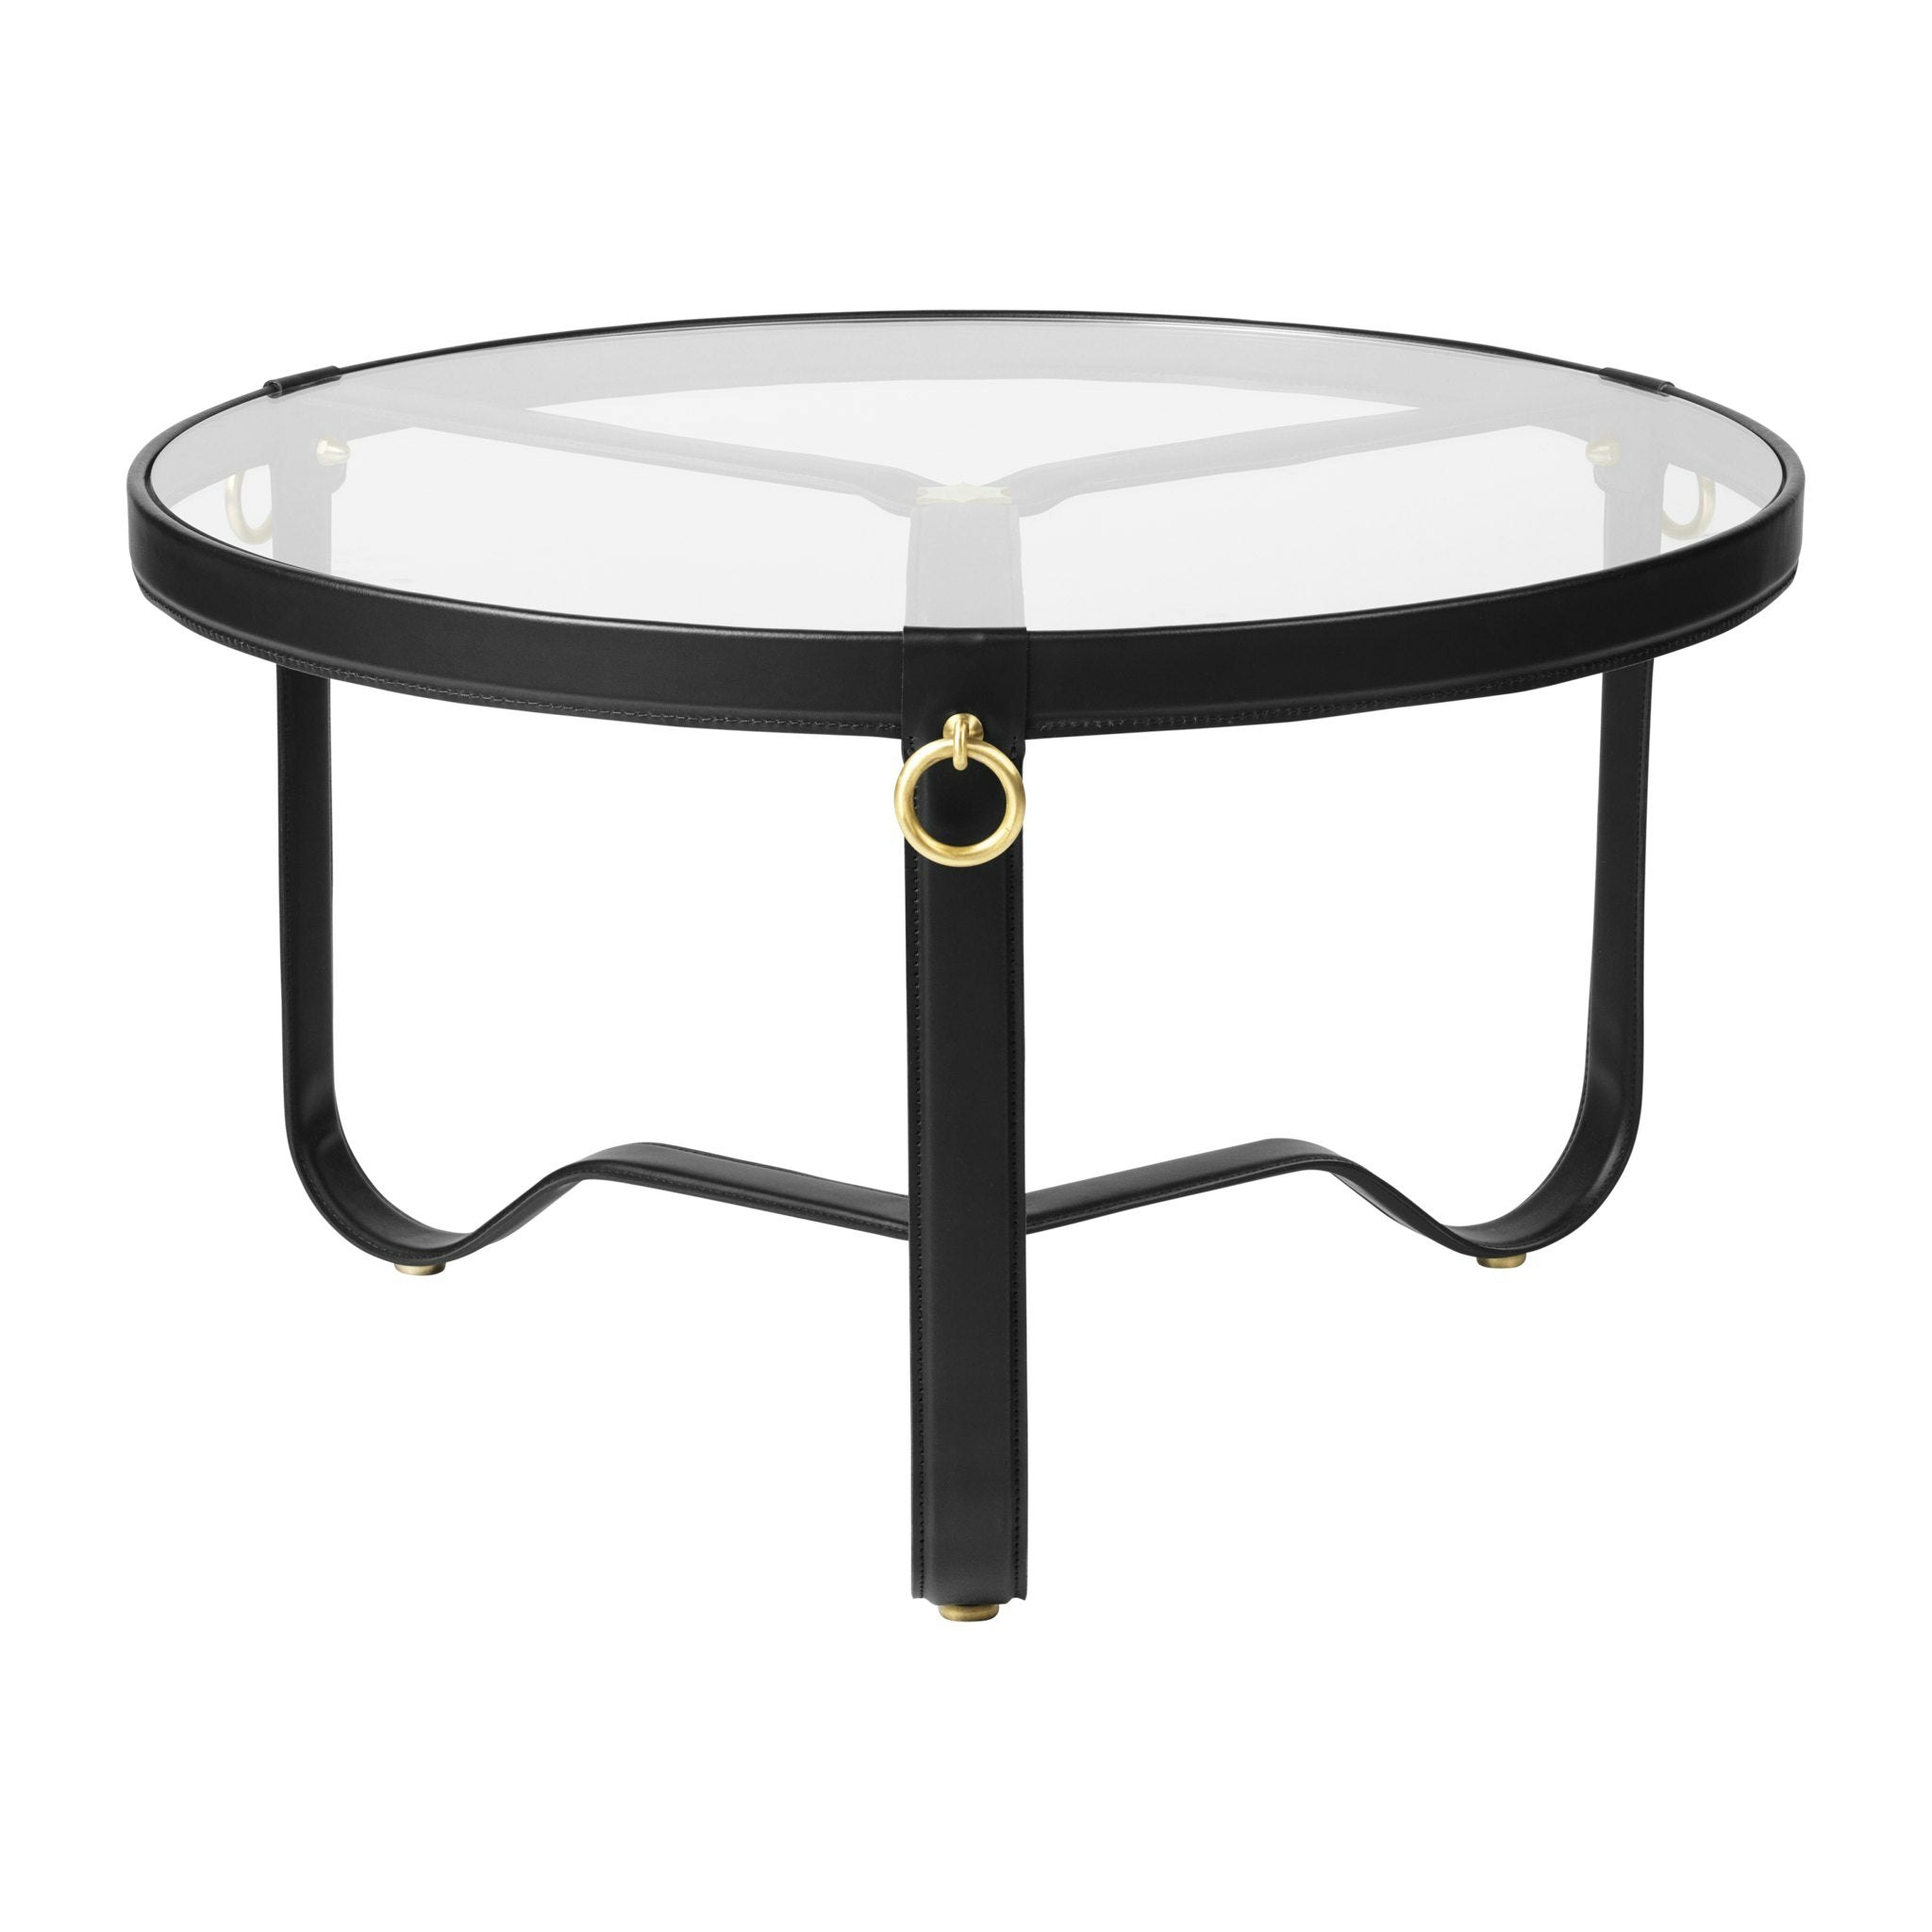 Adnet Coffee Table by Gubi